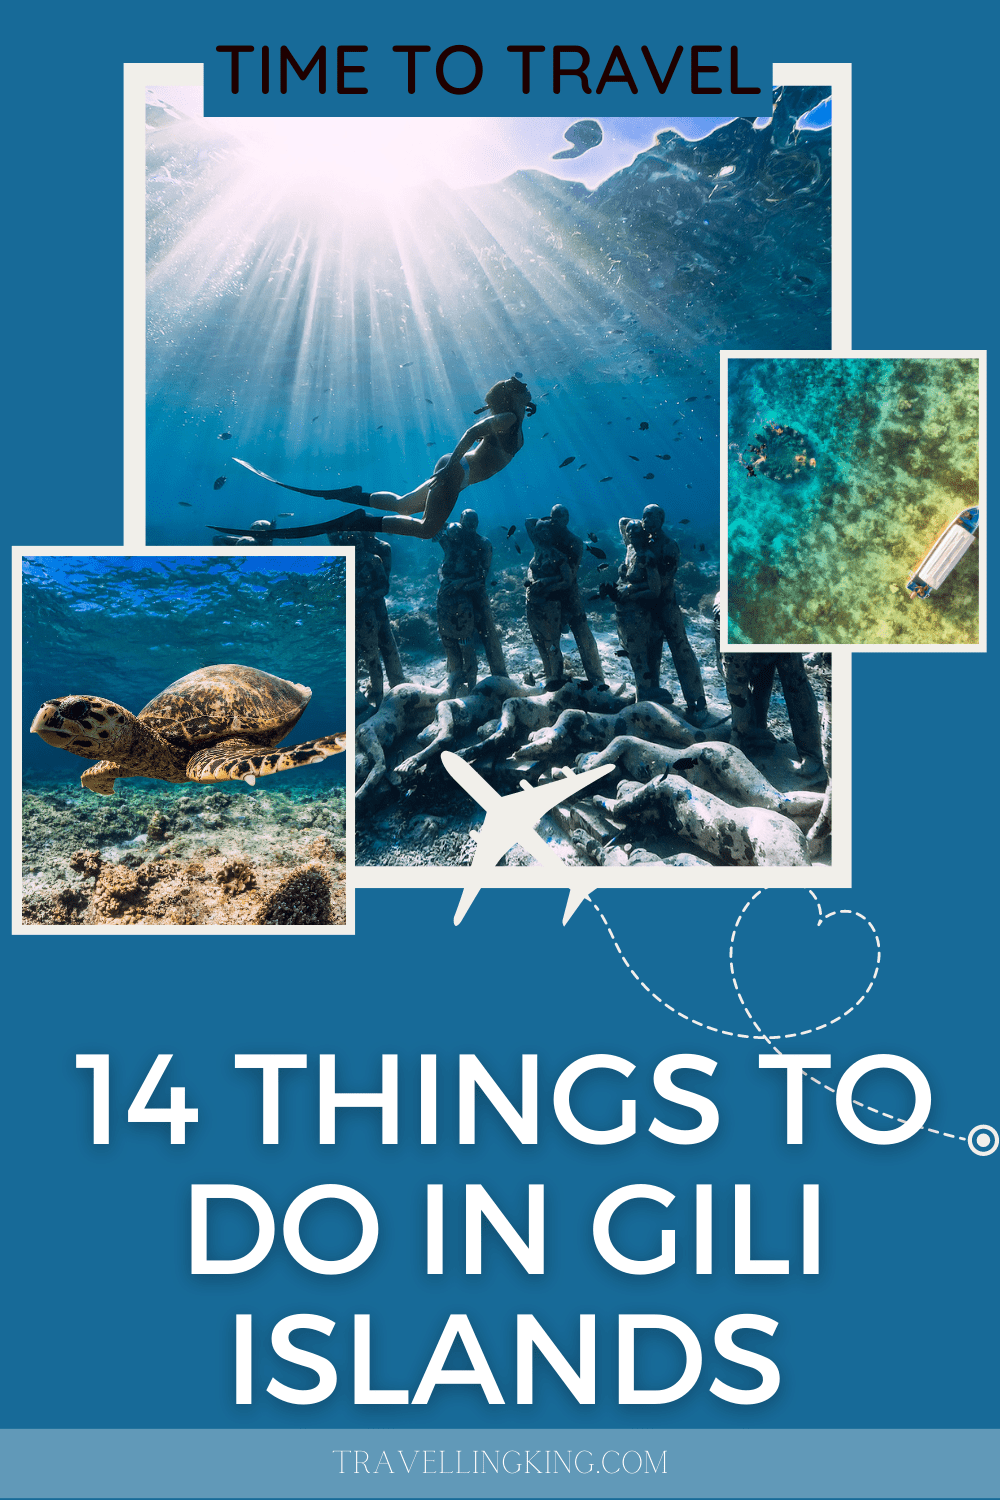 14 Things to do in Gili Islands